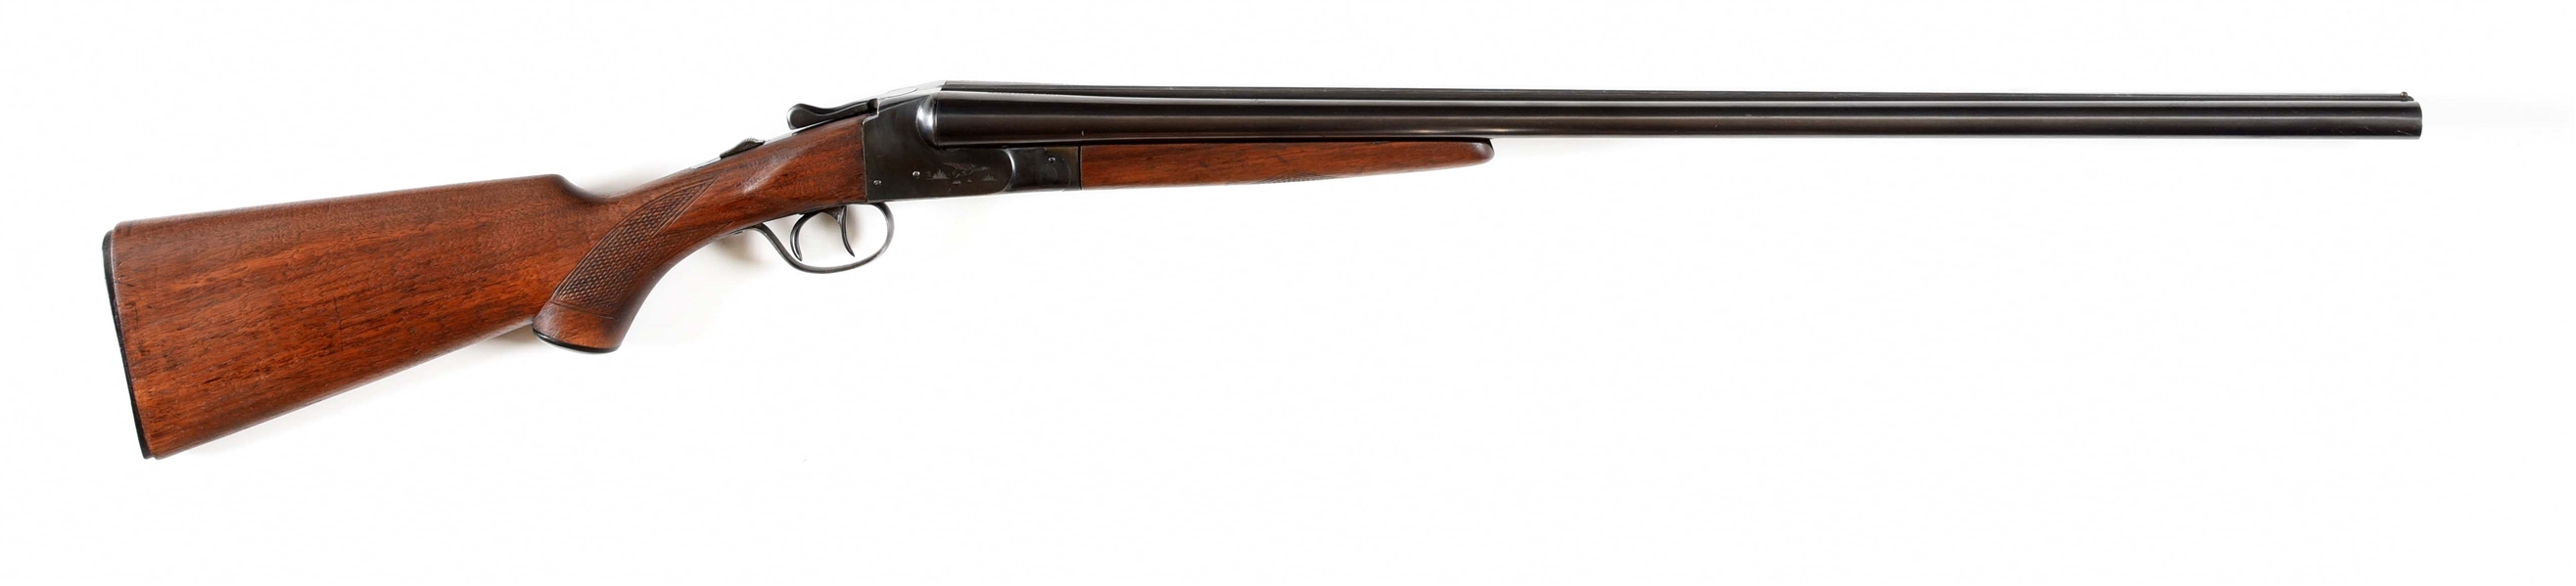 (C) ITHACA LEFEVER NITRO SPECIAL SIDE BY SIDE SHOTGUN